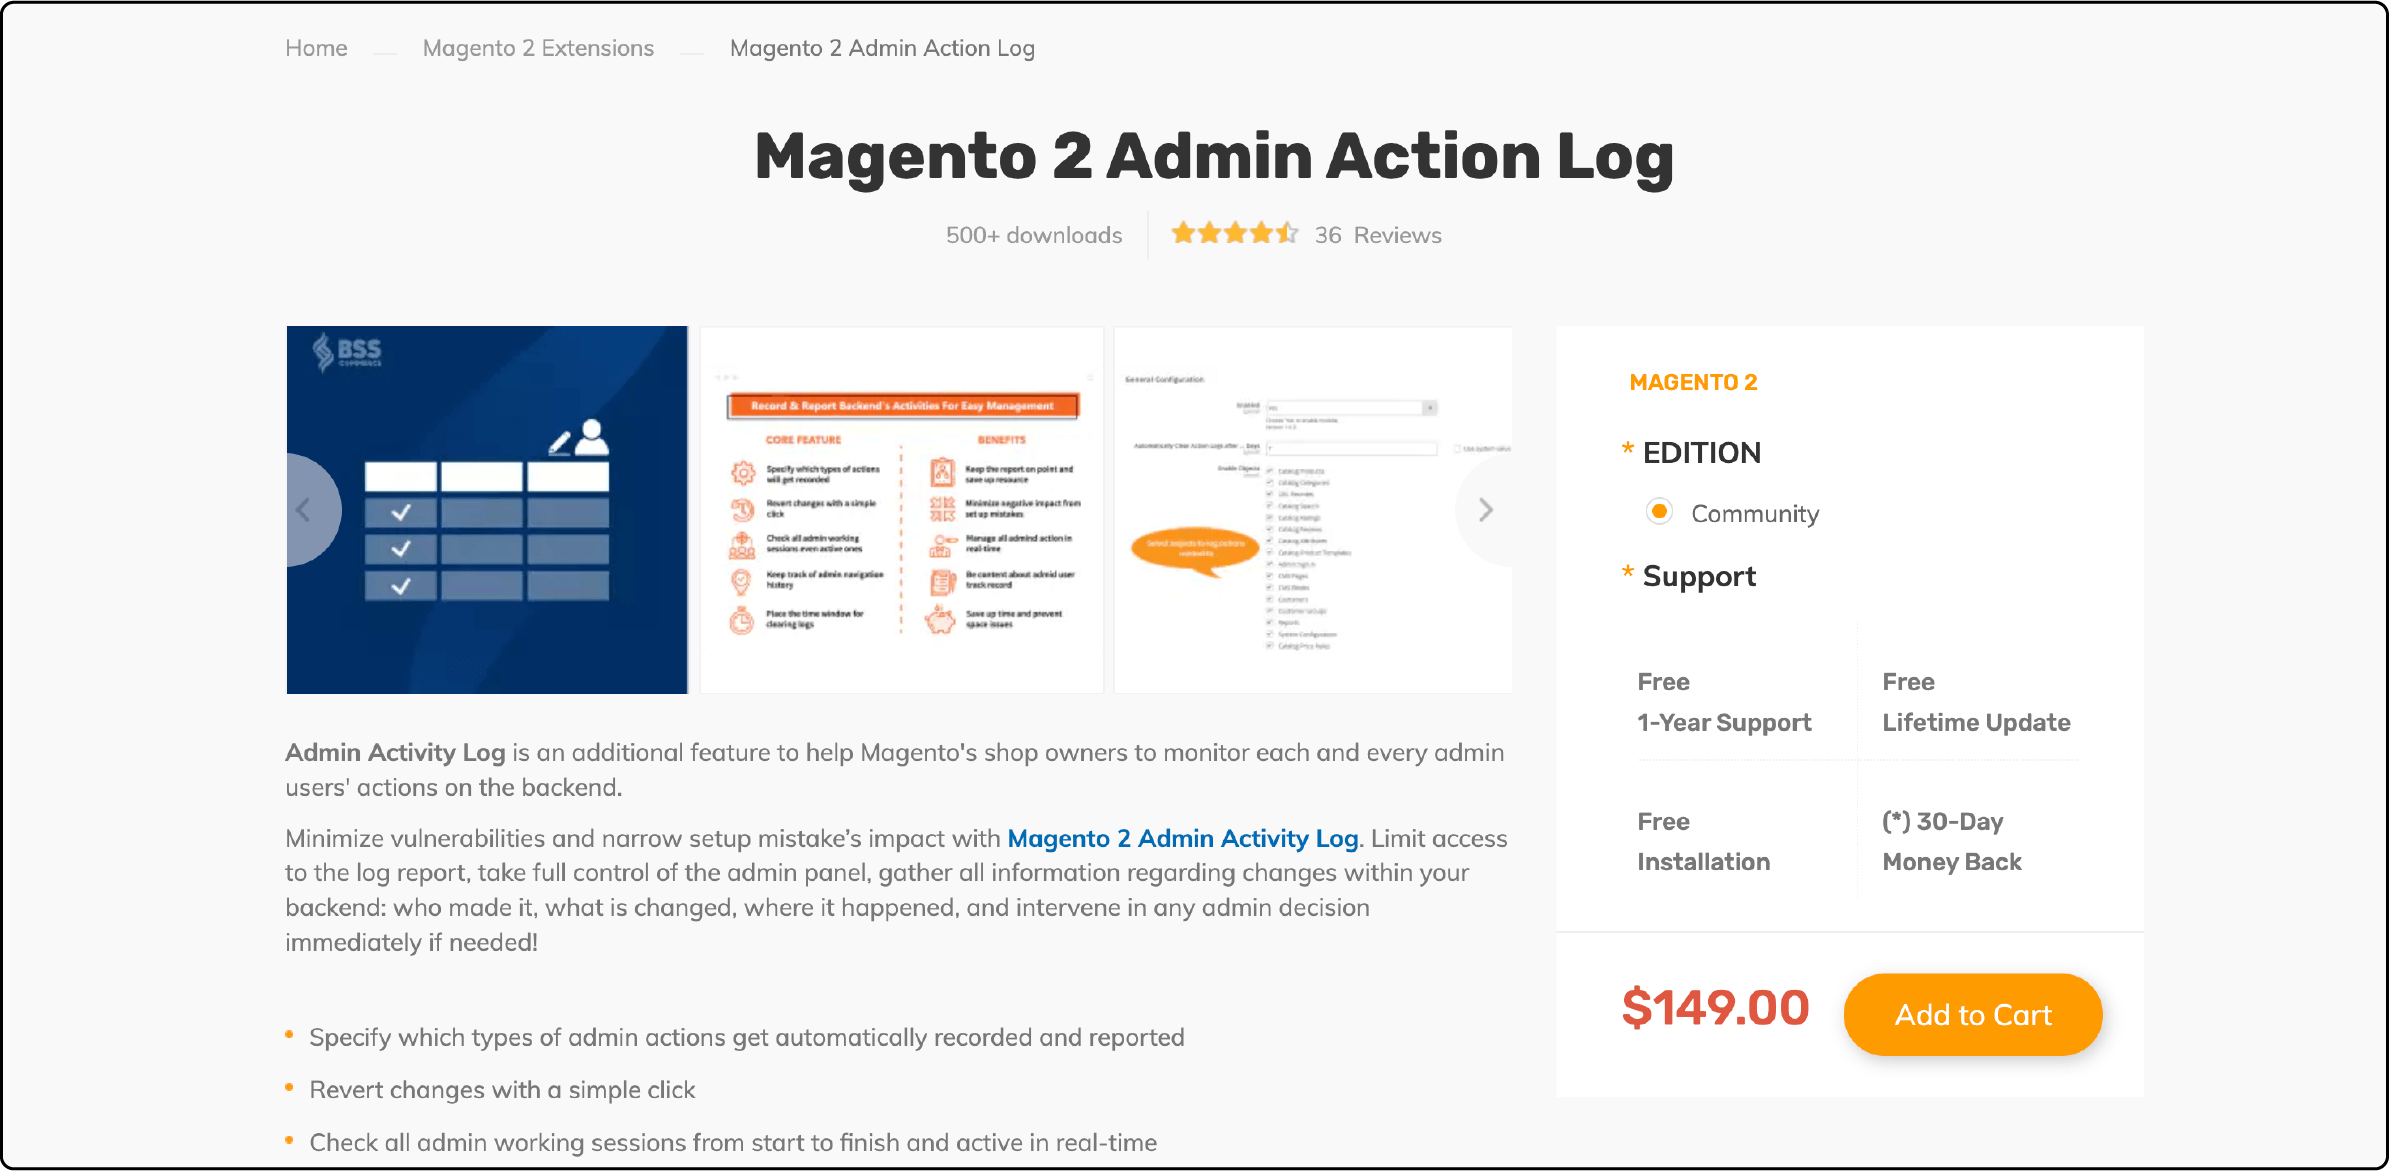 Magento 2 Admin Action Log for tracking admin activities